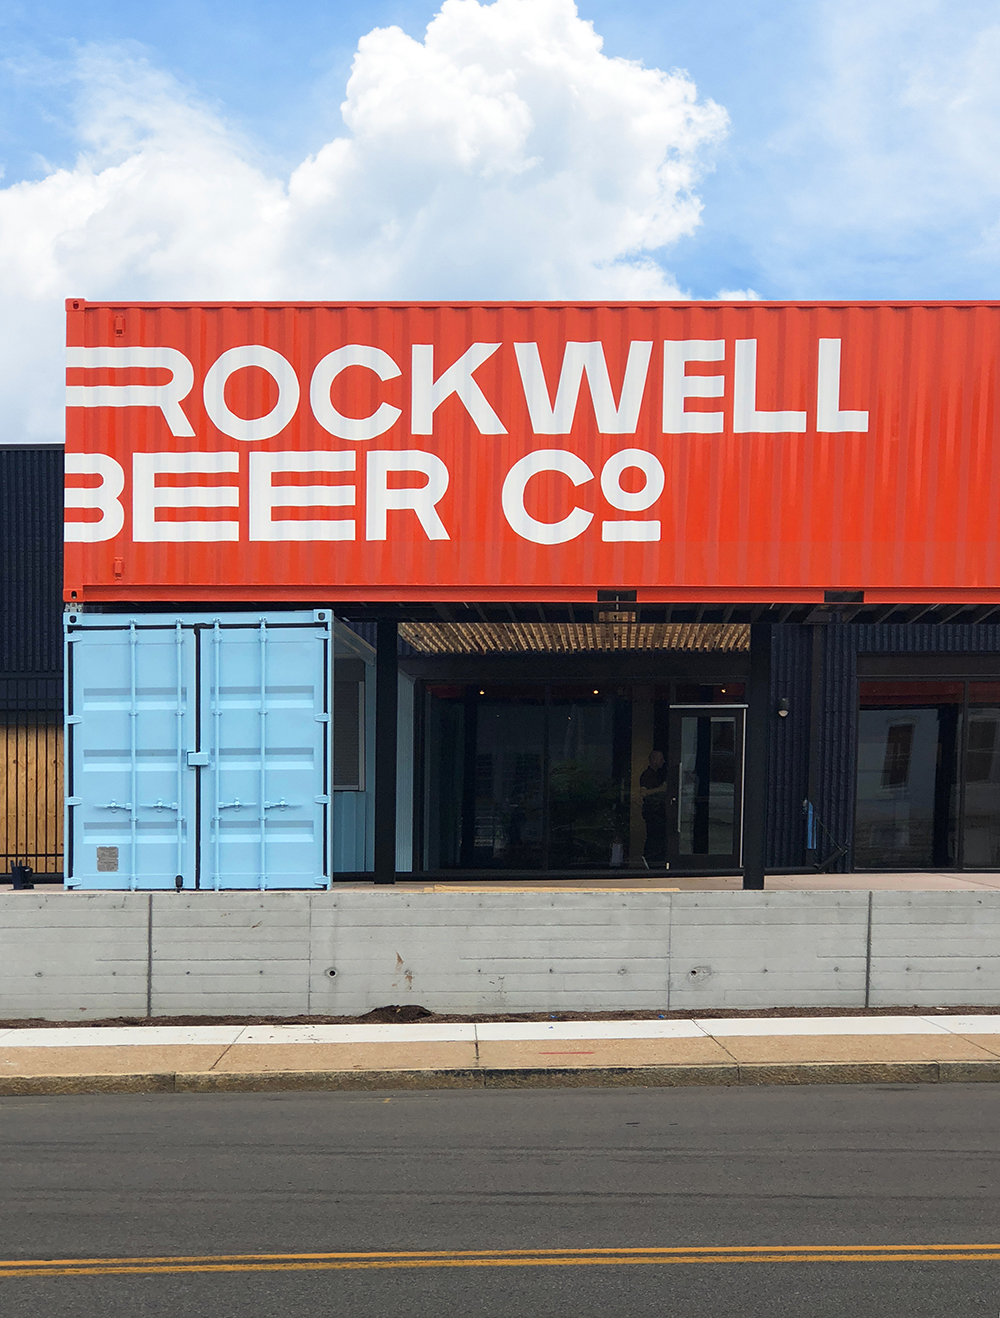 Photo of Rockwell Beer Co. Exterior Signage